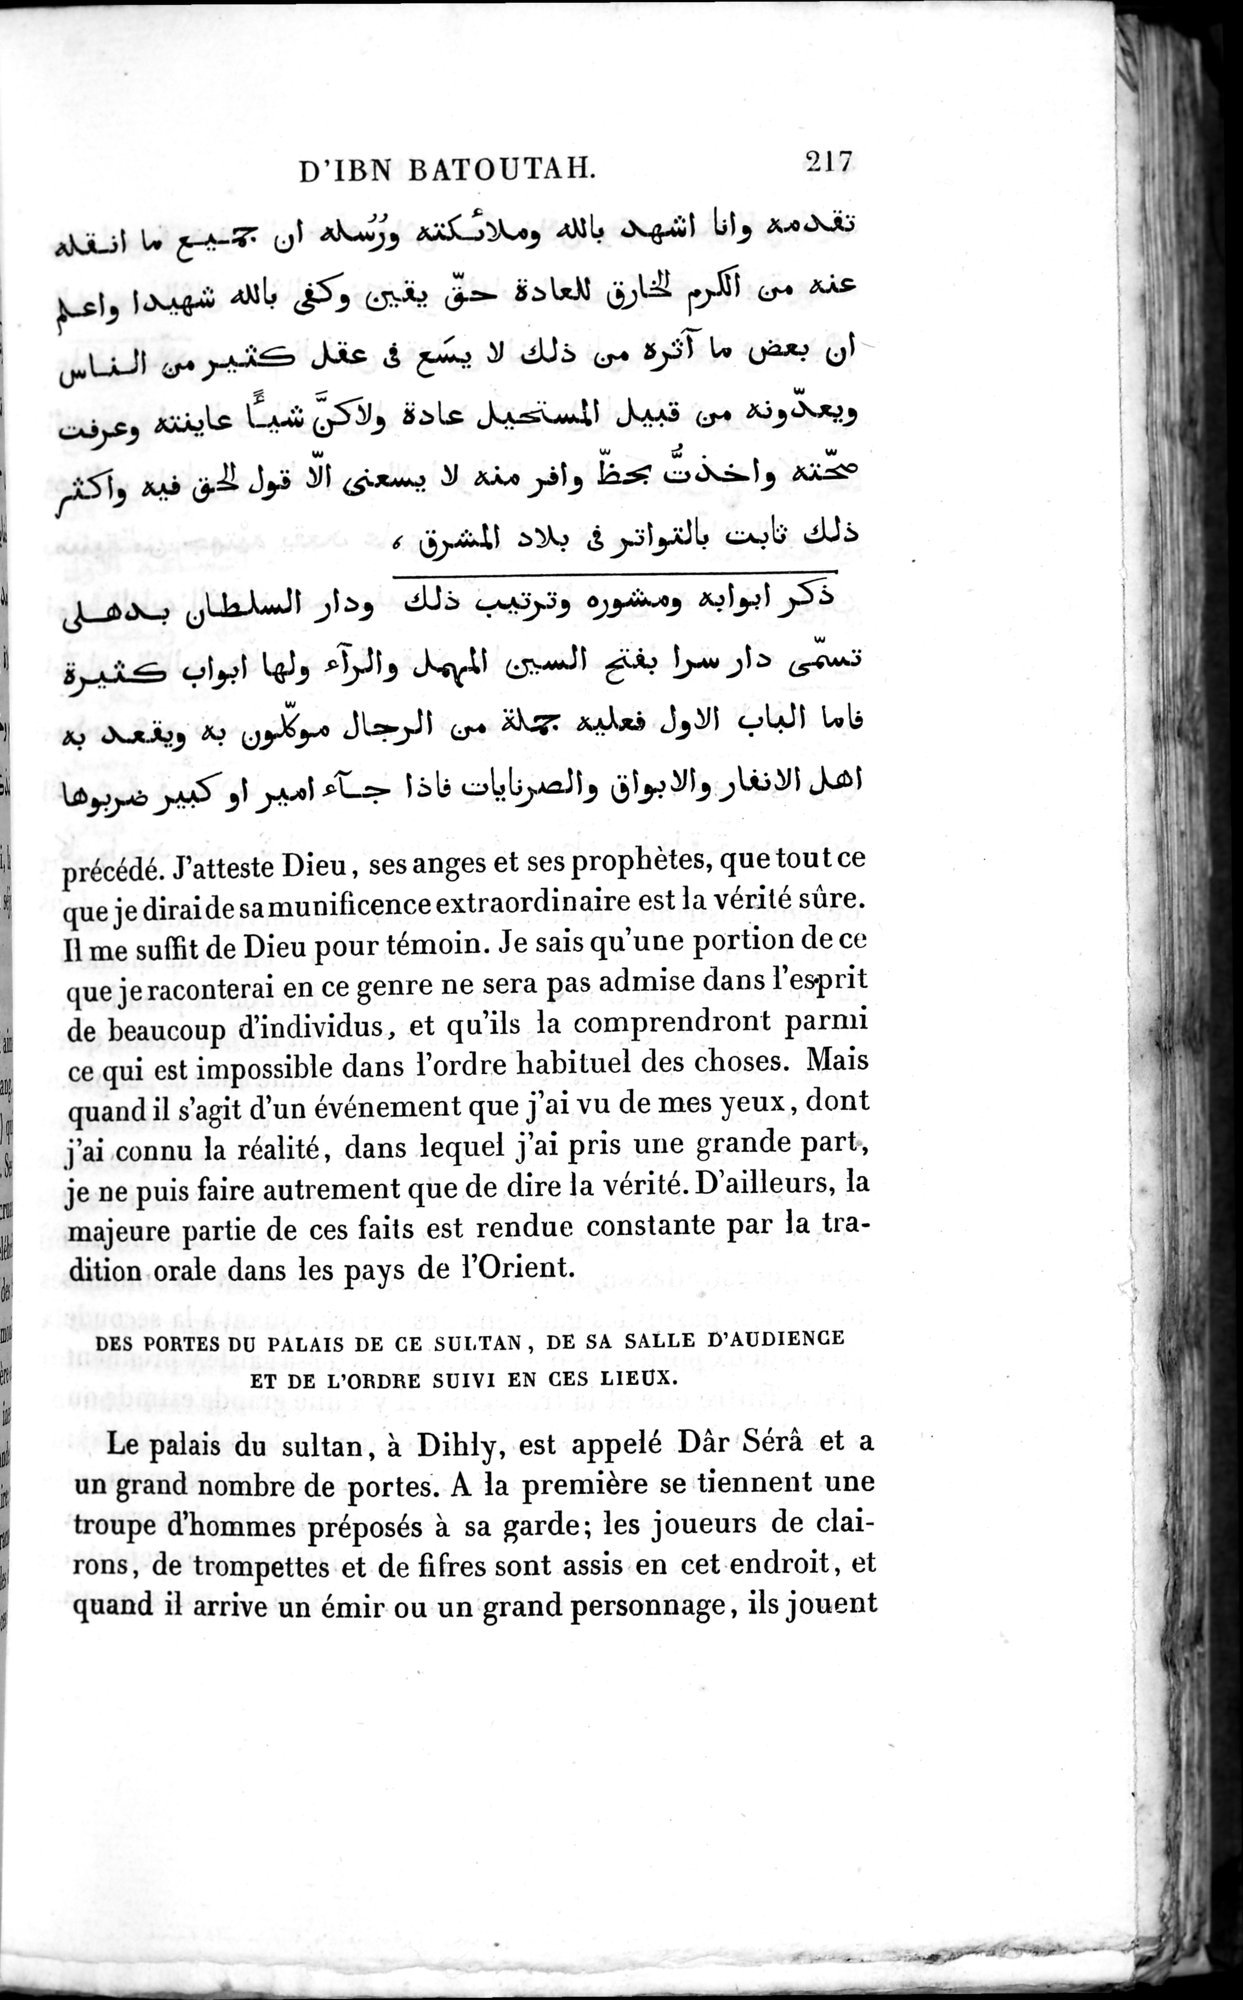 Voyages d'Ibn Batoutah : vol.3 / Page 257 (Grayscale High Resolution Image)